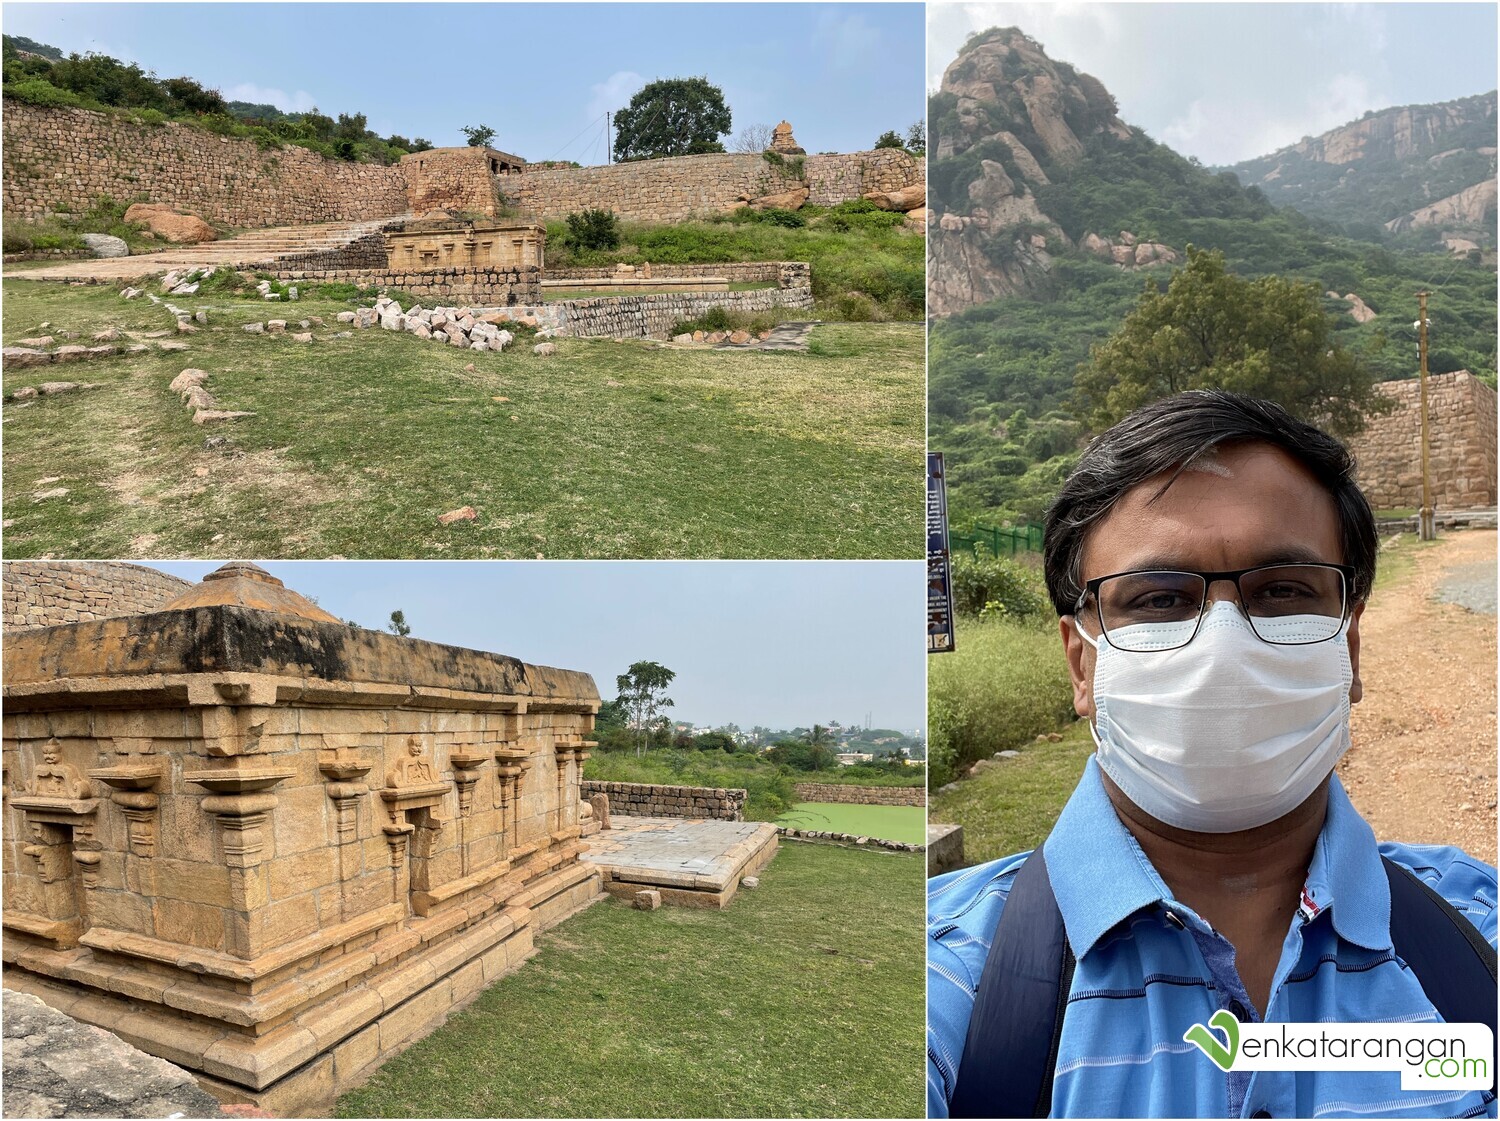 Pictures on the left show the structures restored from ruins at the foot hill of the fort. I was following the COVID-19 protocol and mask discipline whenever I was around another human.